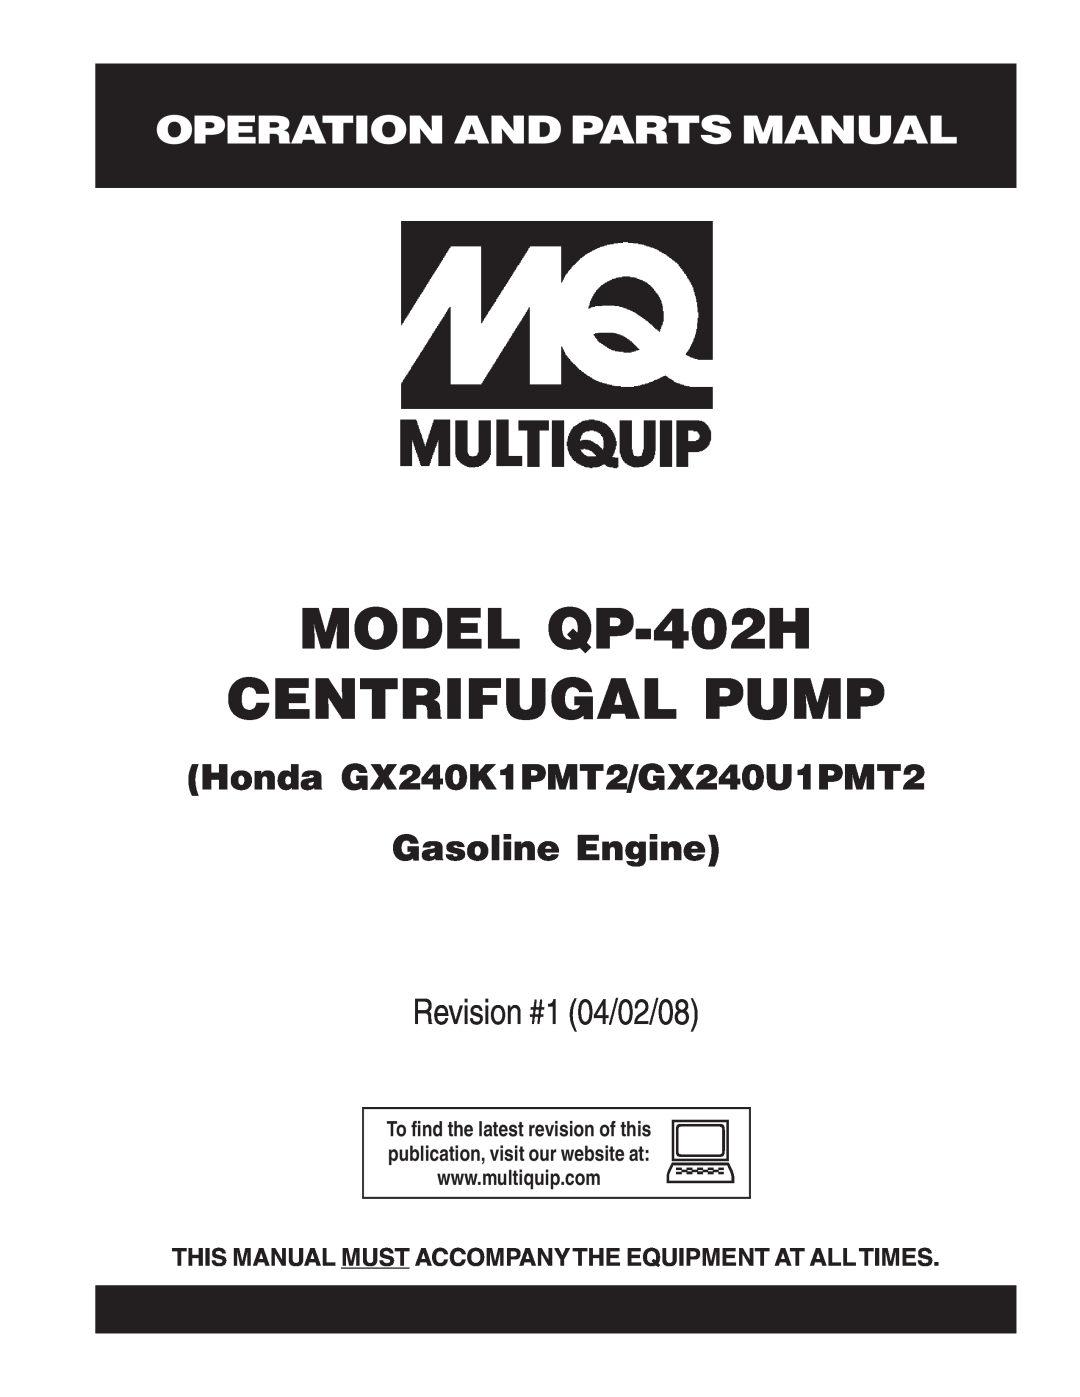 Multiquip qp-402h manual Operation And Parts Manual, MODEL QP-402H CENTRIFUGAL PUMP, Revision #1 04/02/08 